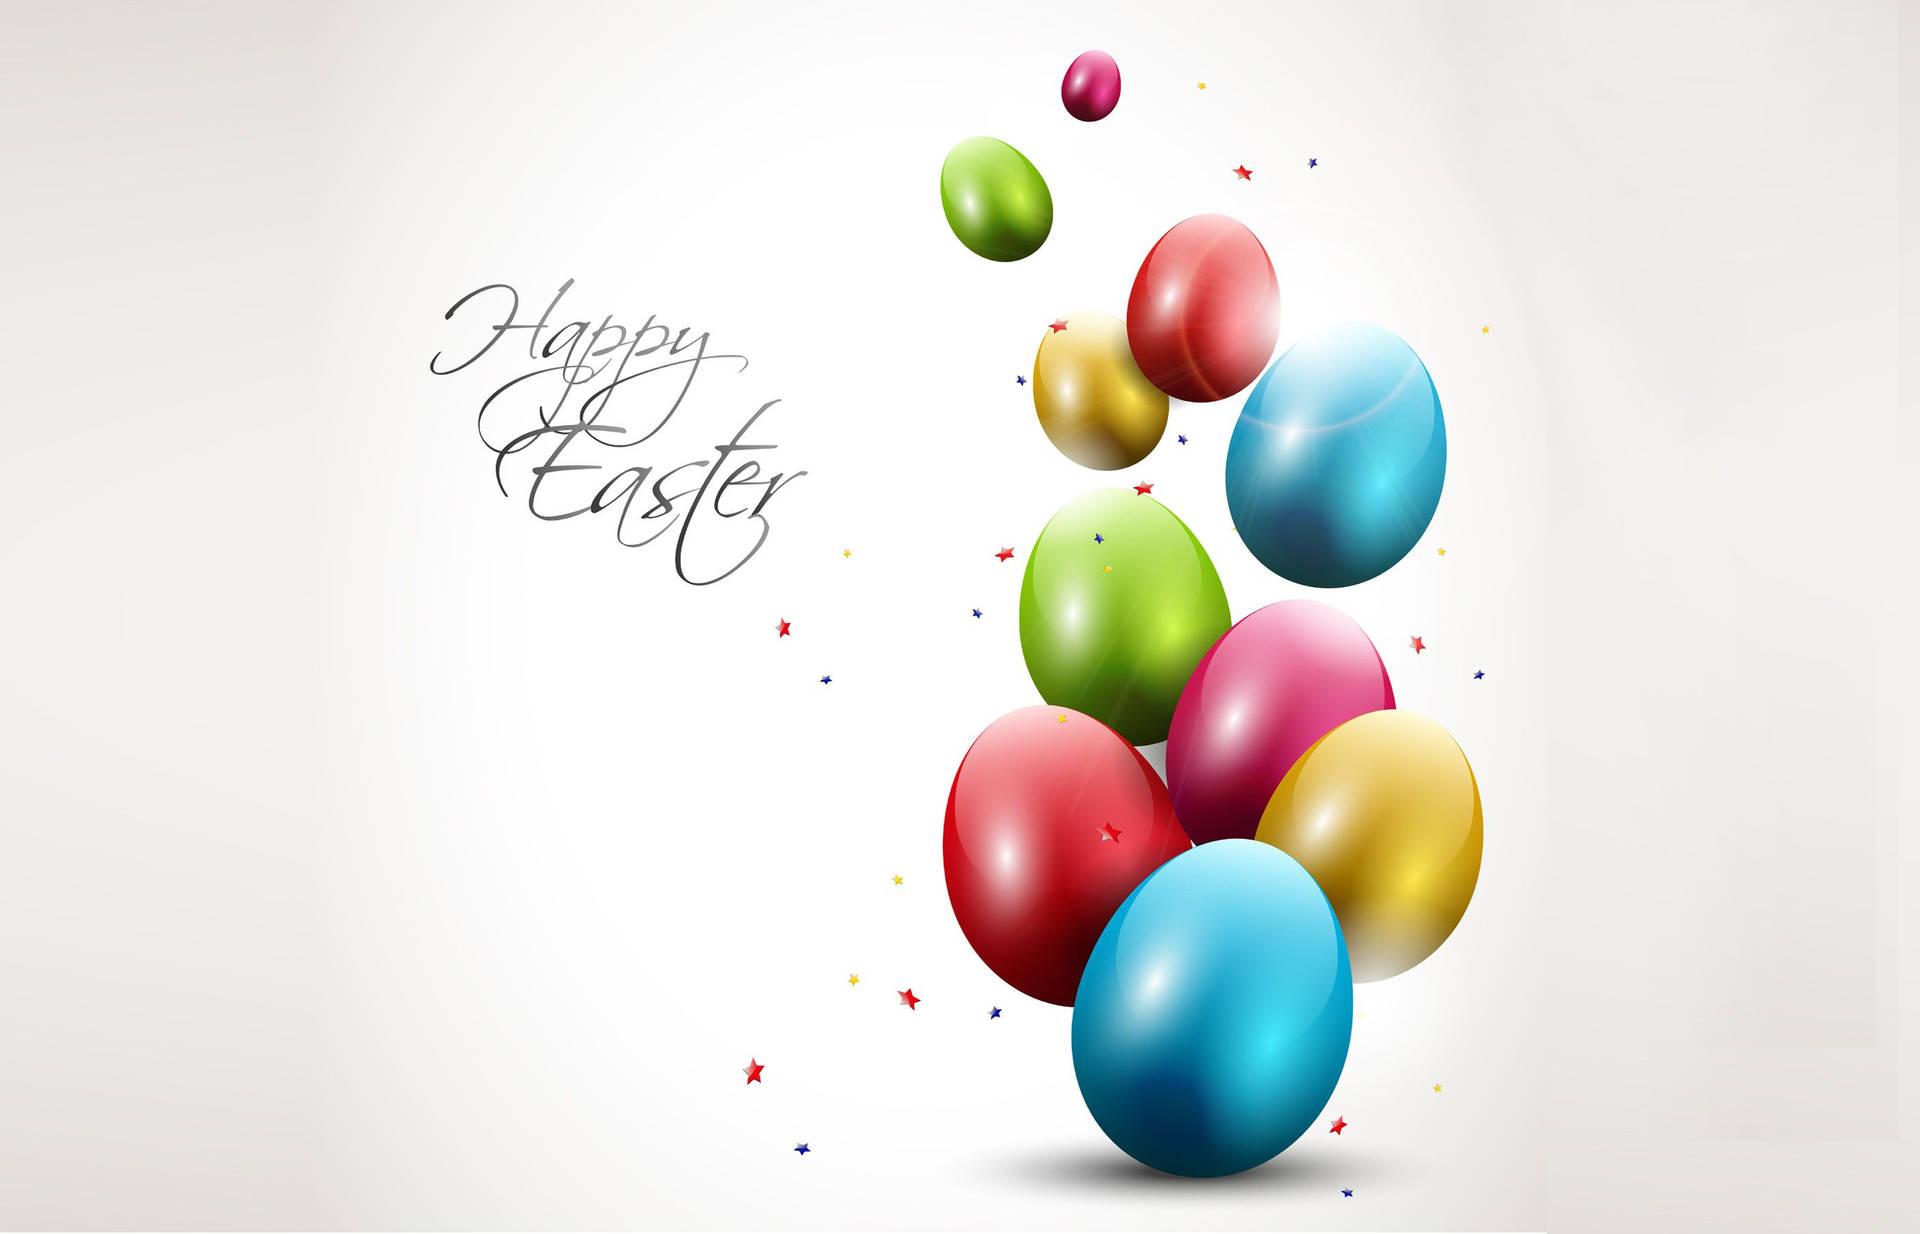 Silver Happy Easter With Eggs Digital Art Background